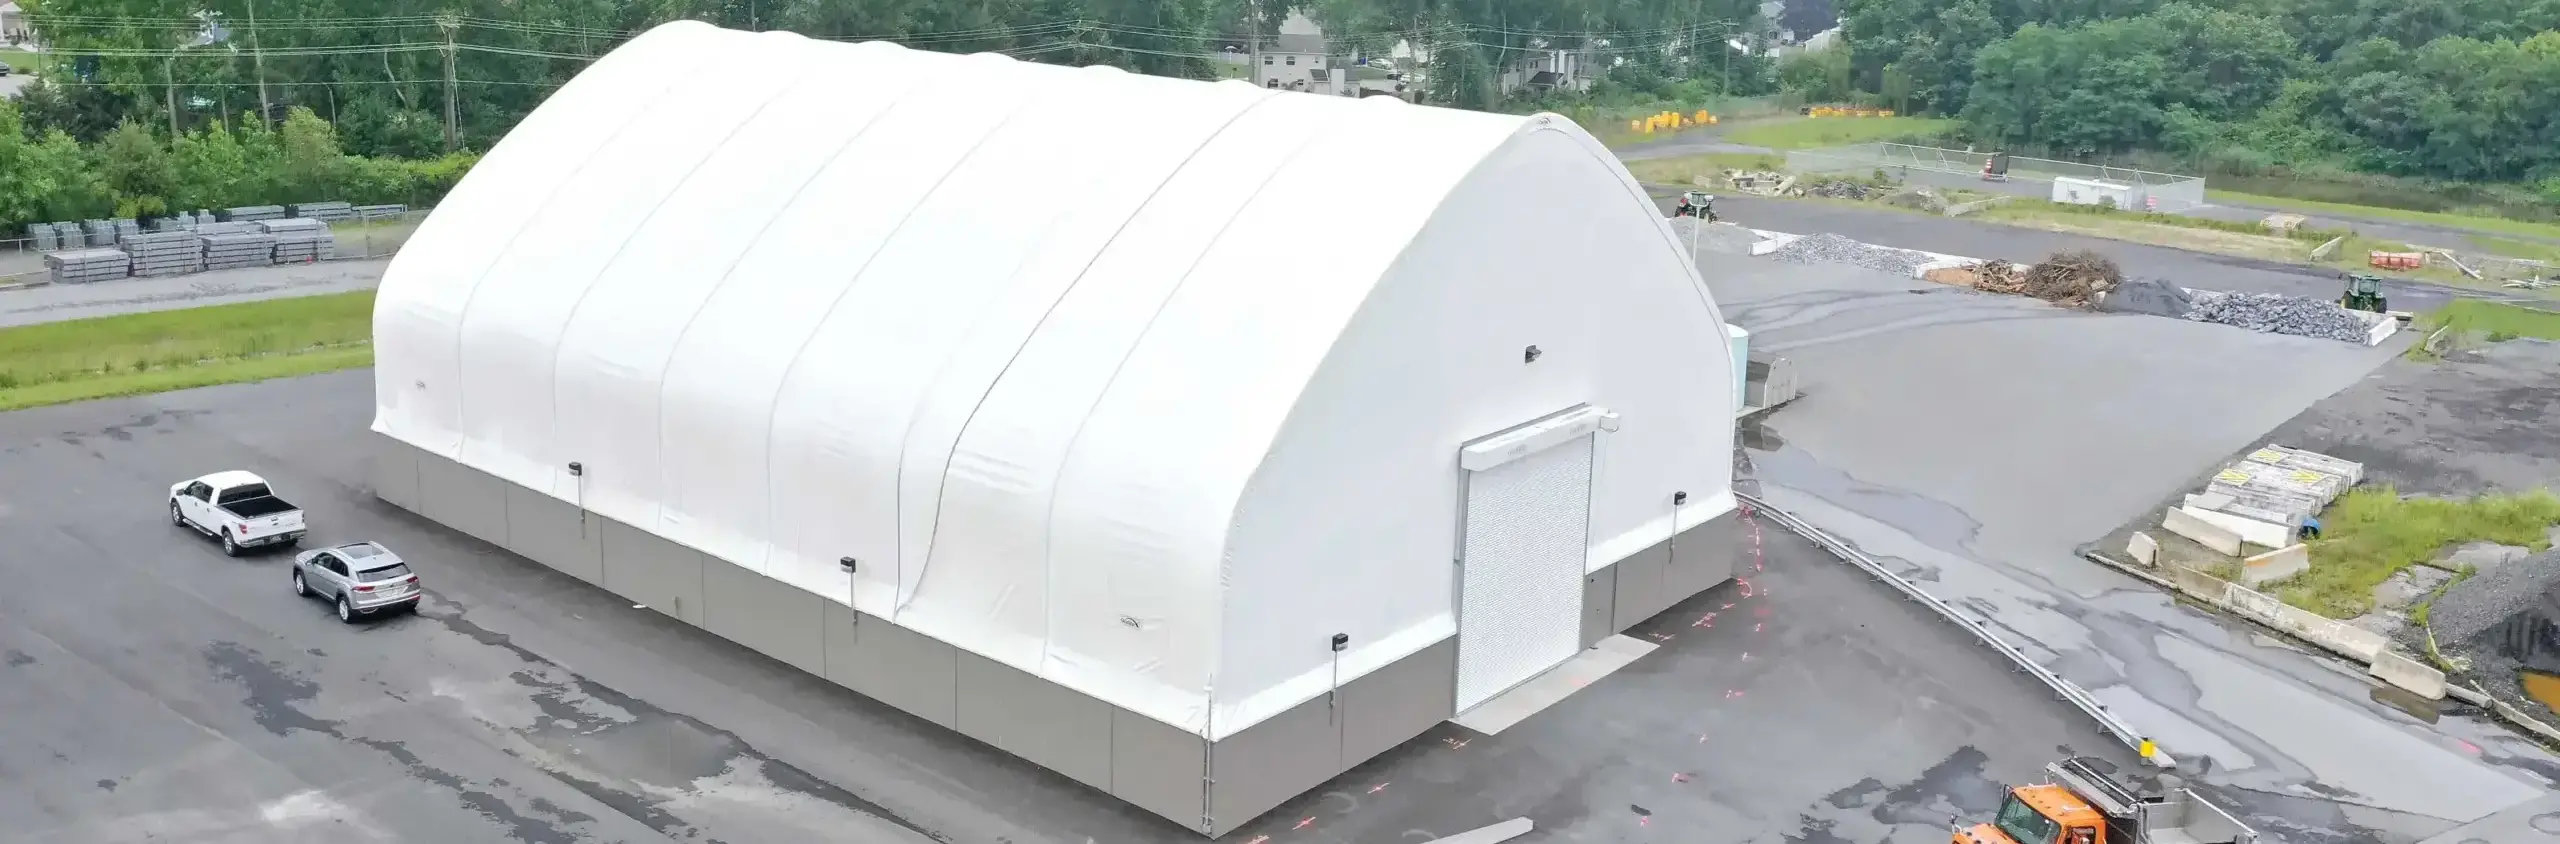 White fabric structure exterior with concrete foundation